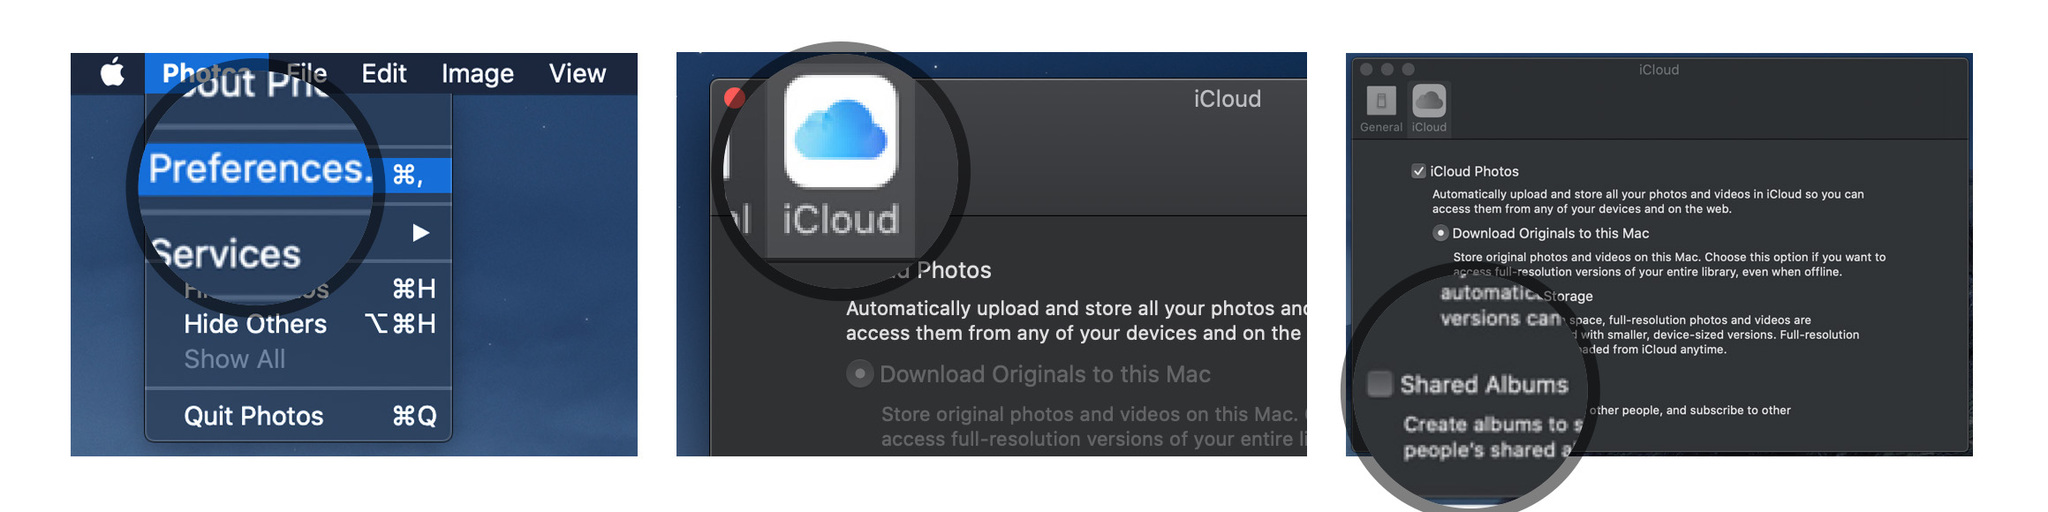 How to upload photos into iCloud Photo Library from iPhone